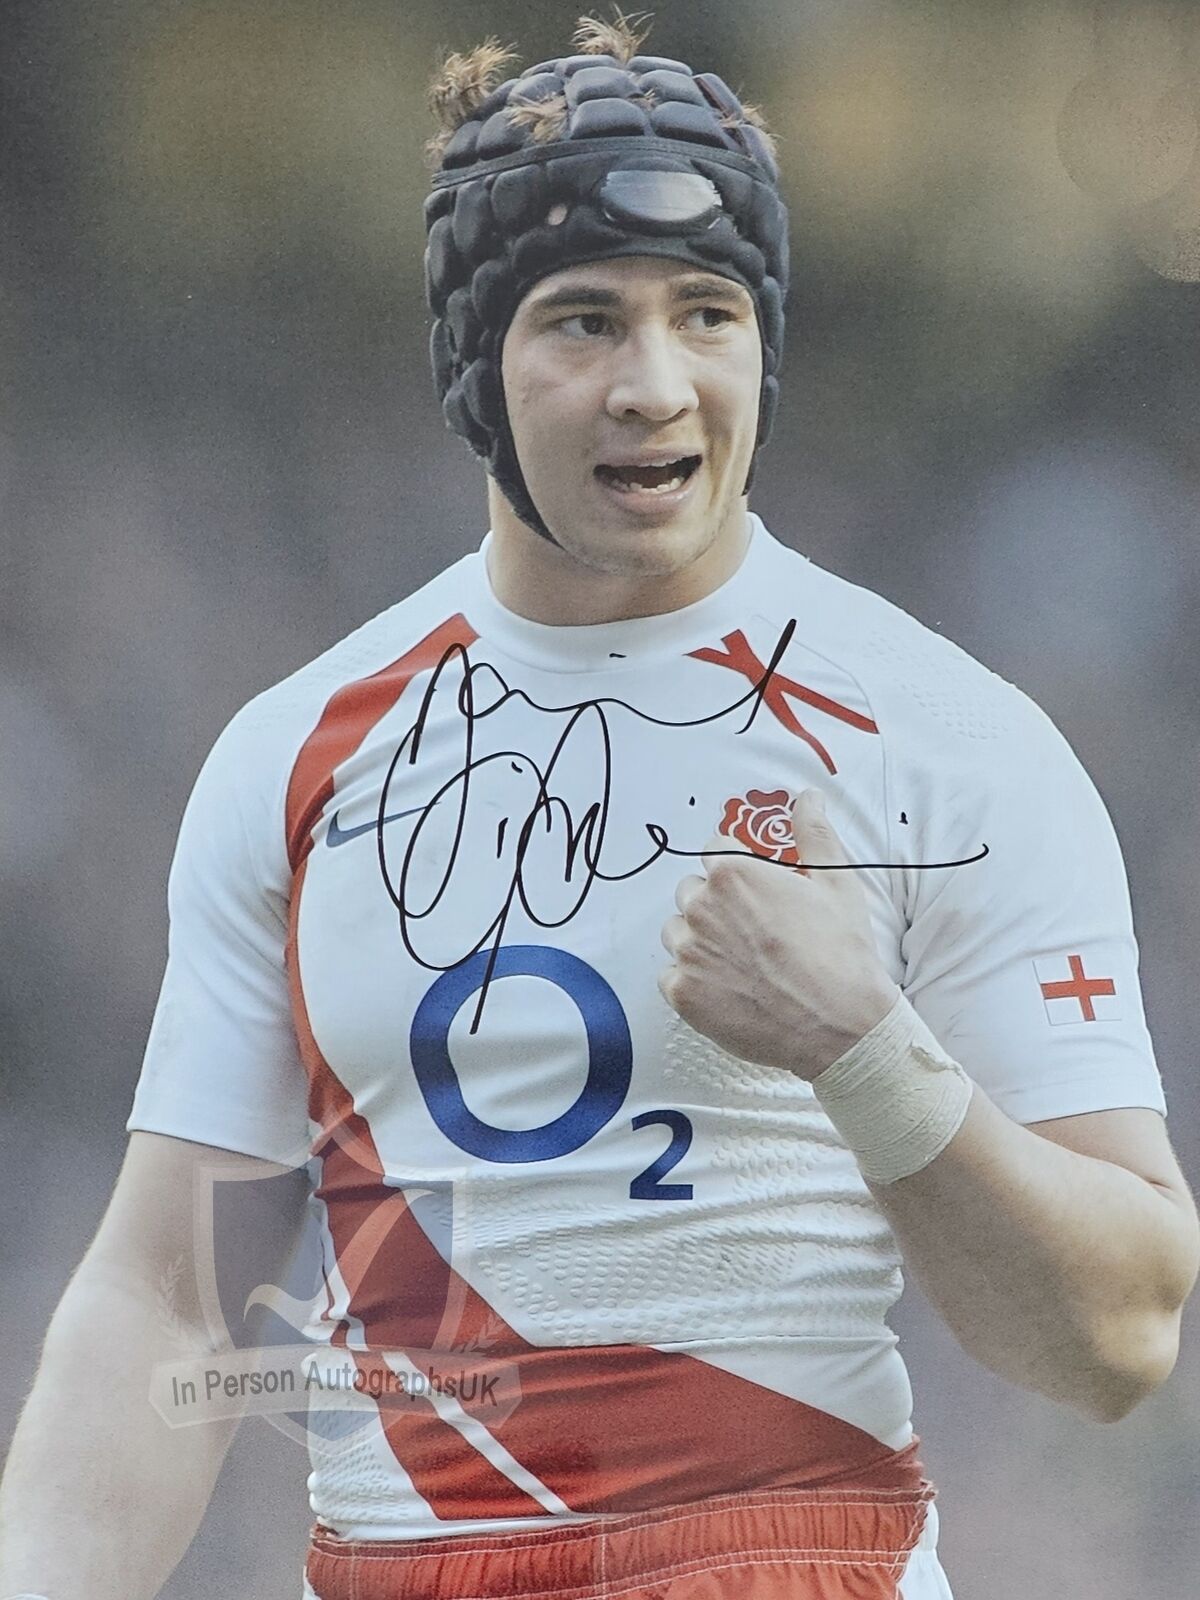 Danny Cipriani ENGLAND RUGBY Signed 16x12 Photo OnlineCOA AFTAL